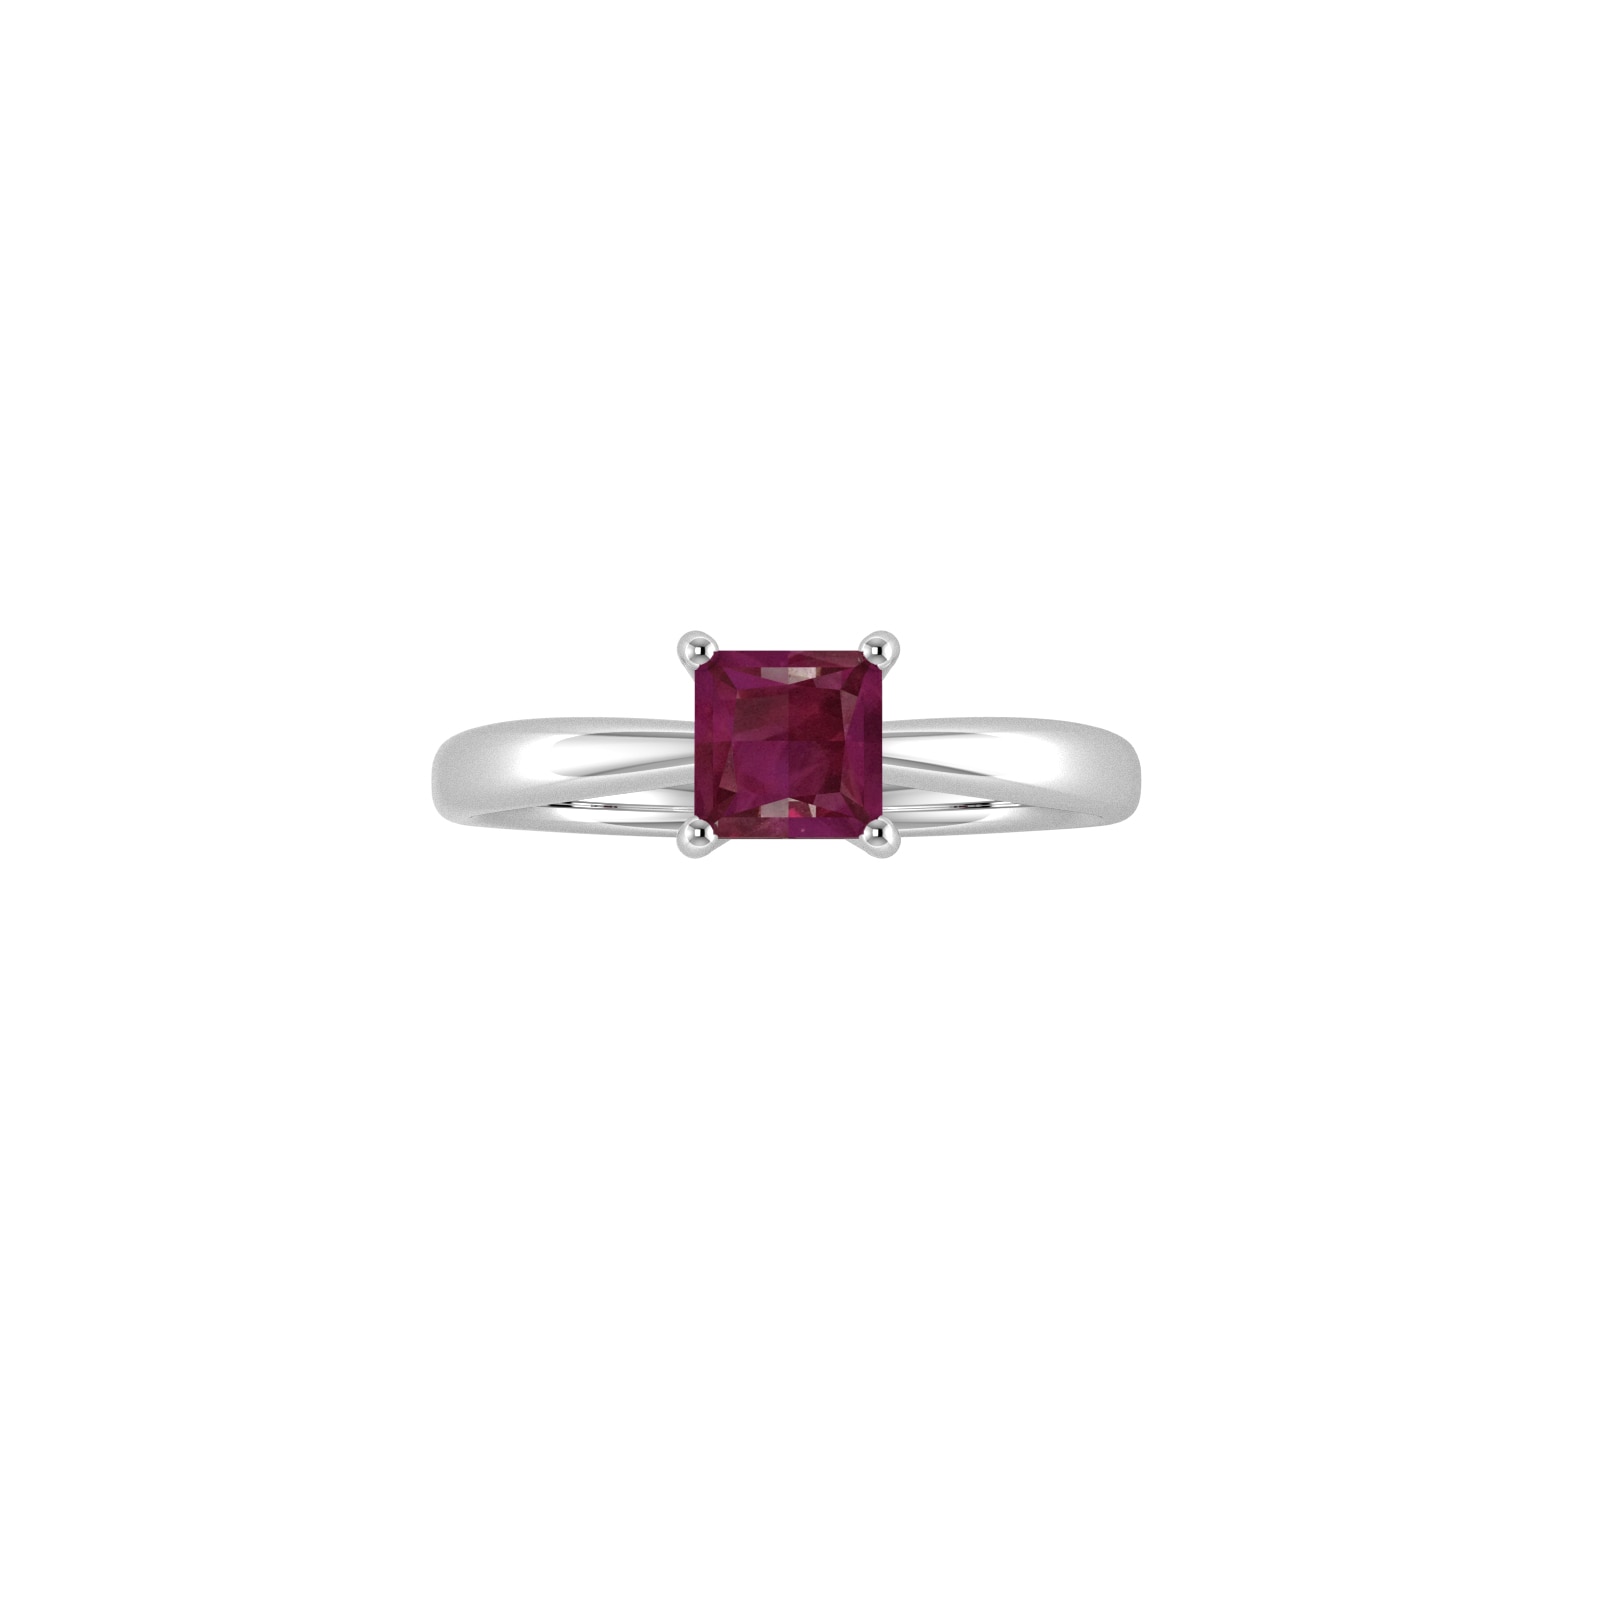 9ct White Gold 4 Claw Square Ruby 5mm x 5mm Ring- Ring Size F.5